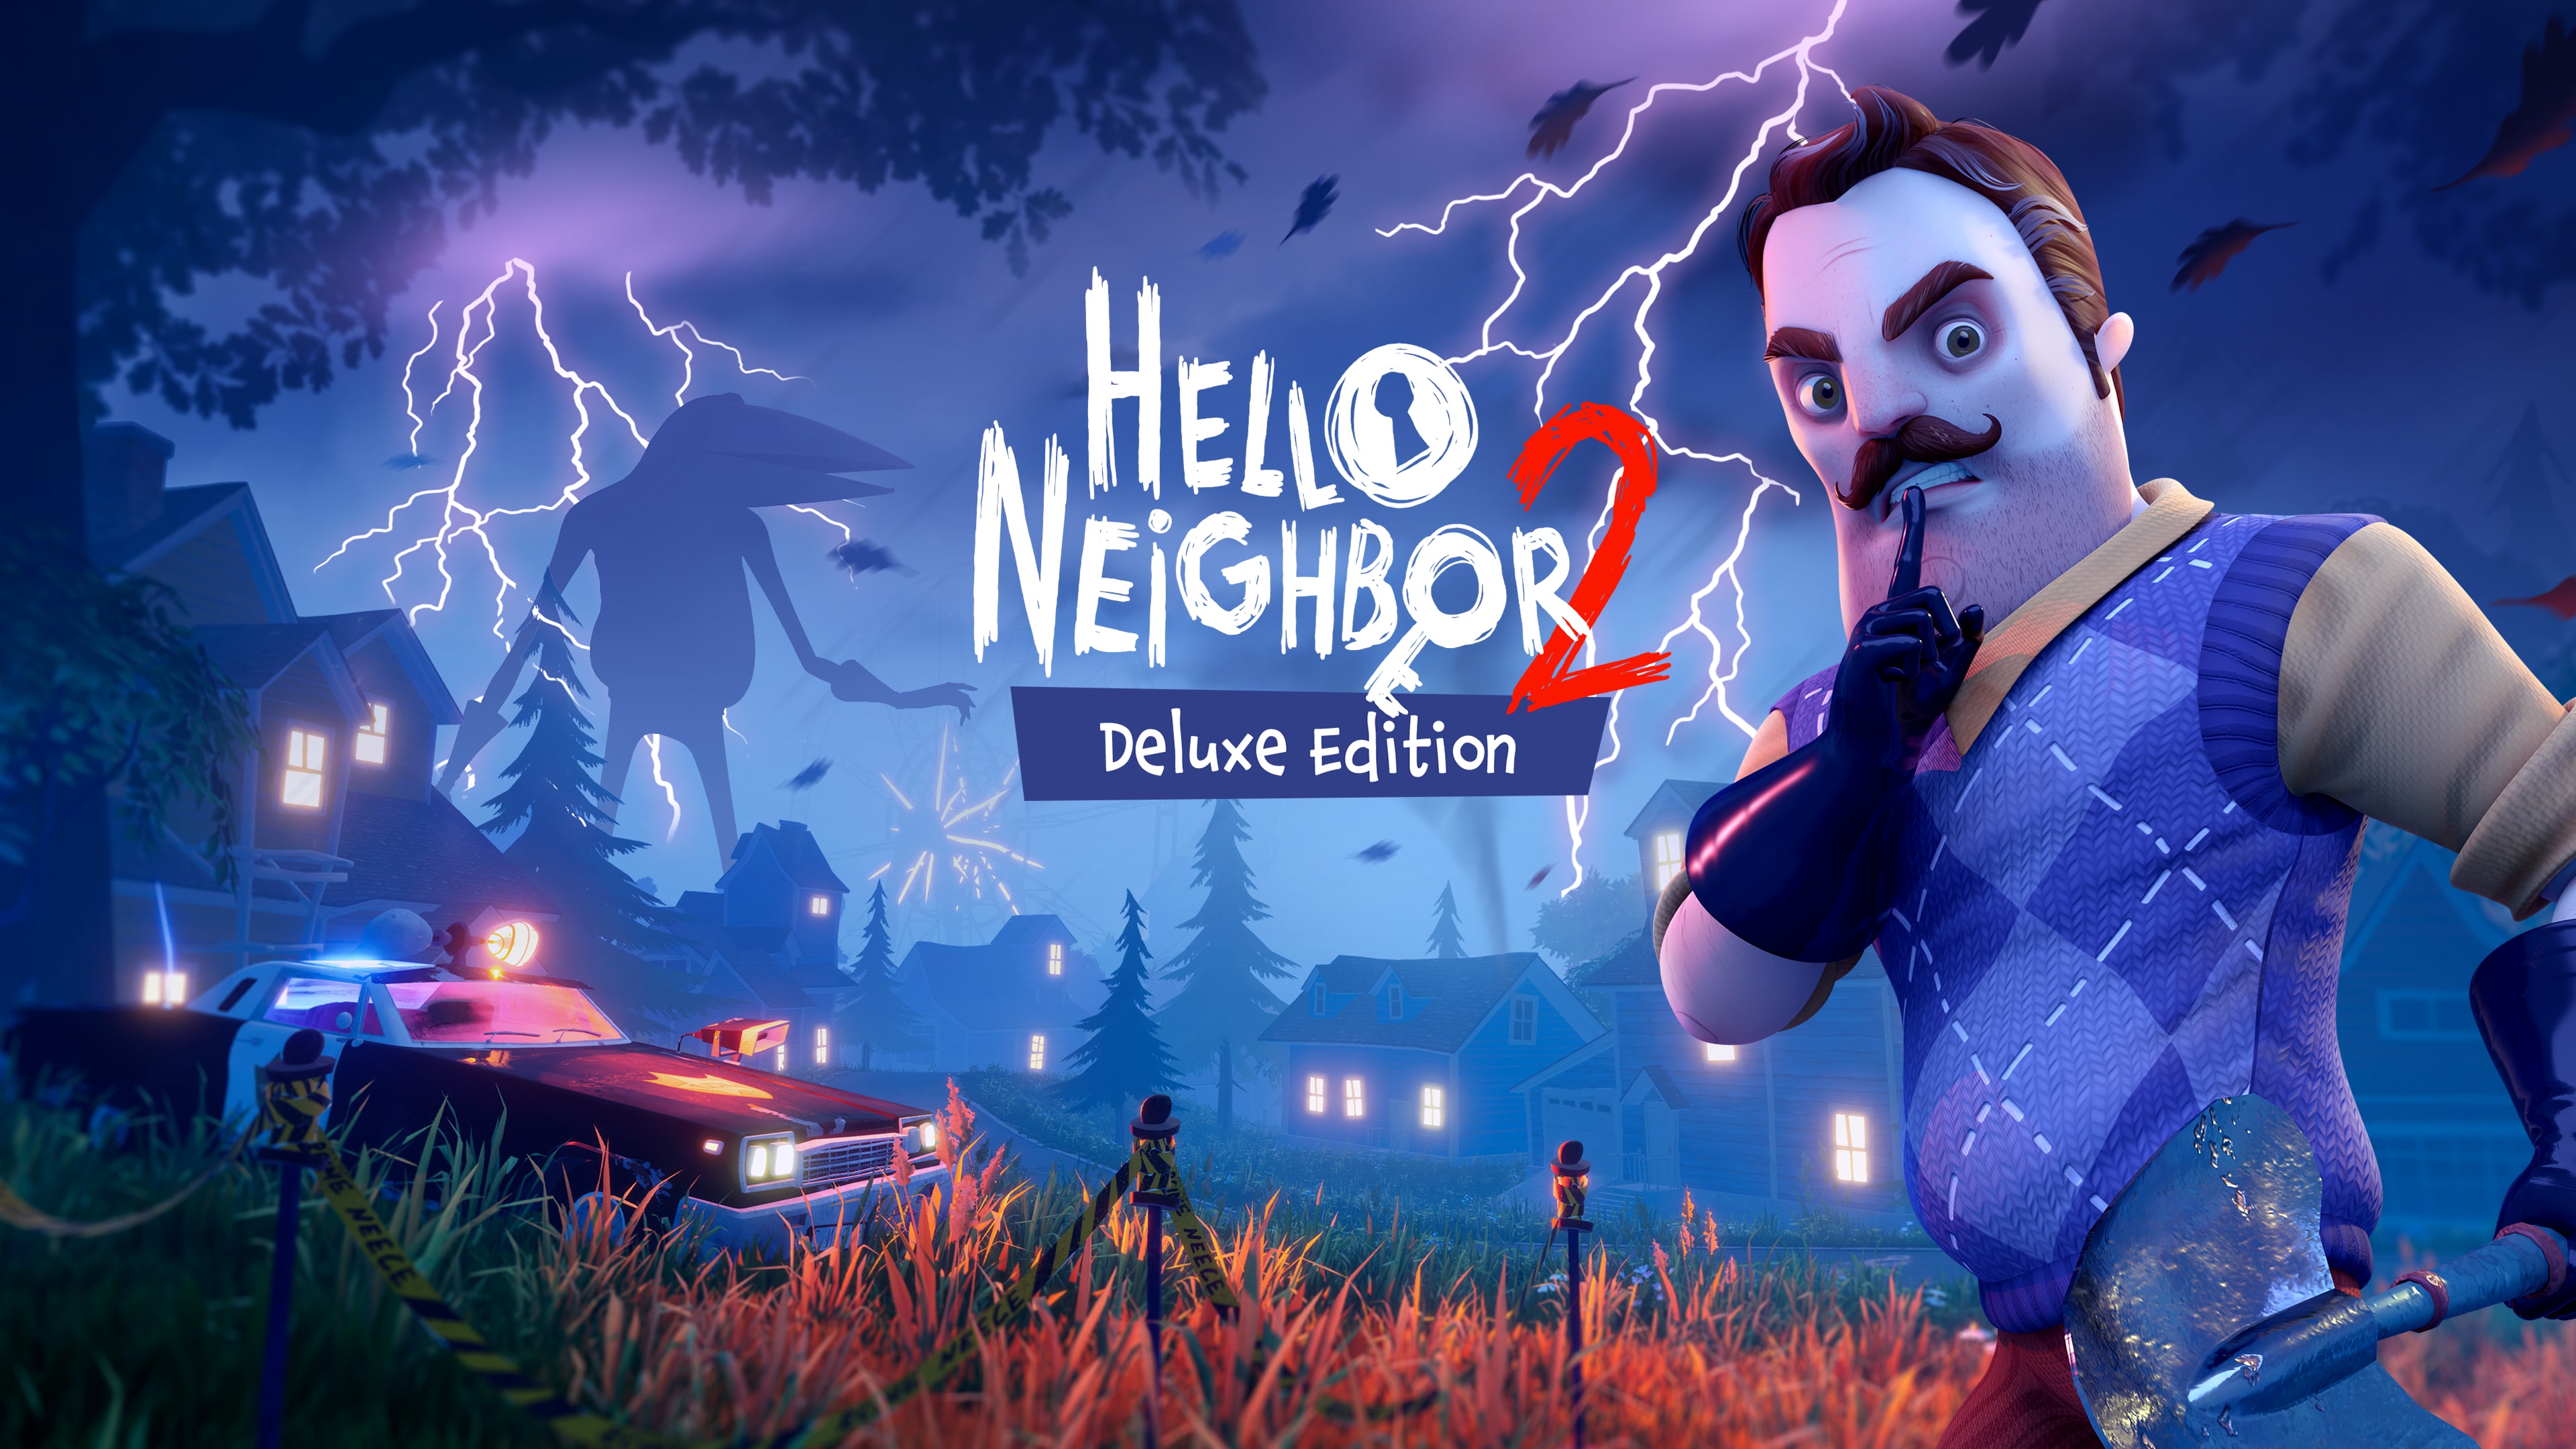 Hello Neighbor 2 Deluxe Edition (Simplified Chinese, English, Korean, Japanese, Traditional Chinese)